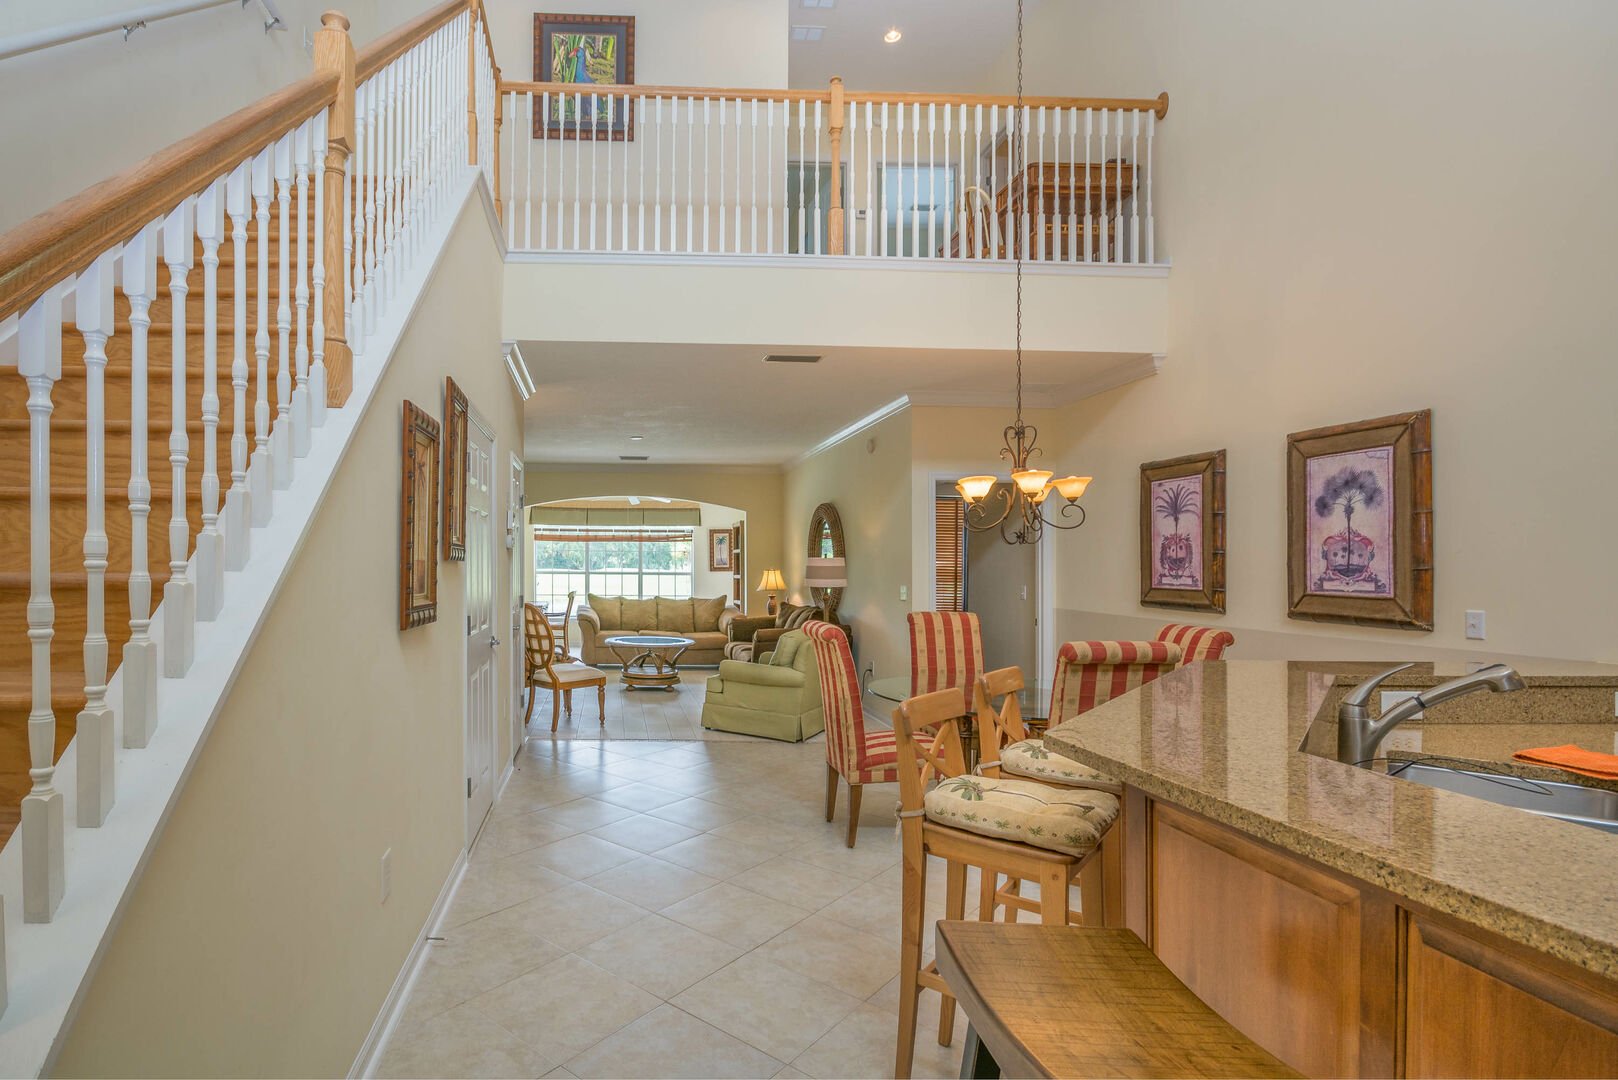 Stairway of this new Smyrna beach Florida vacation home leading to upstairs guest bedrooms